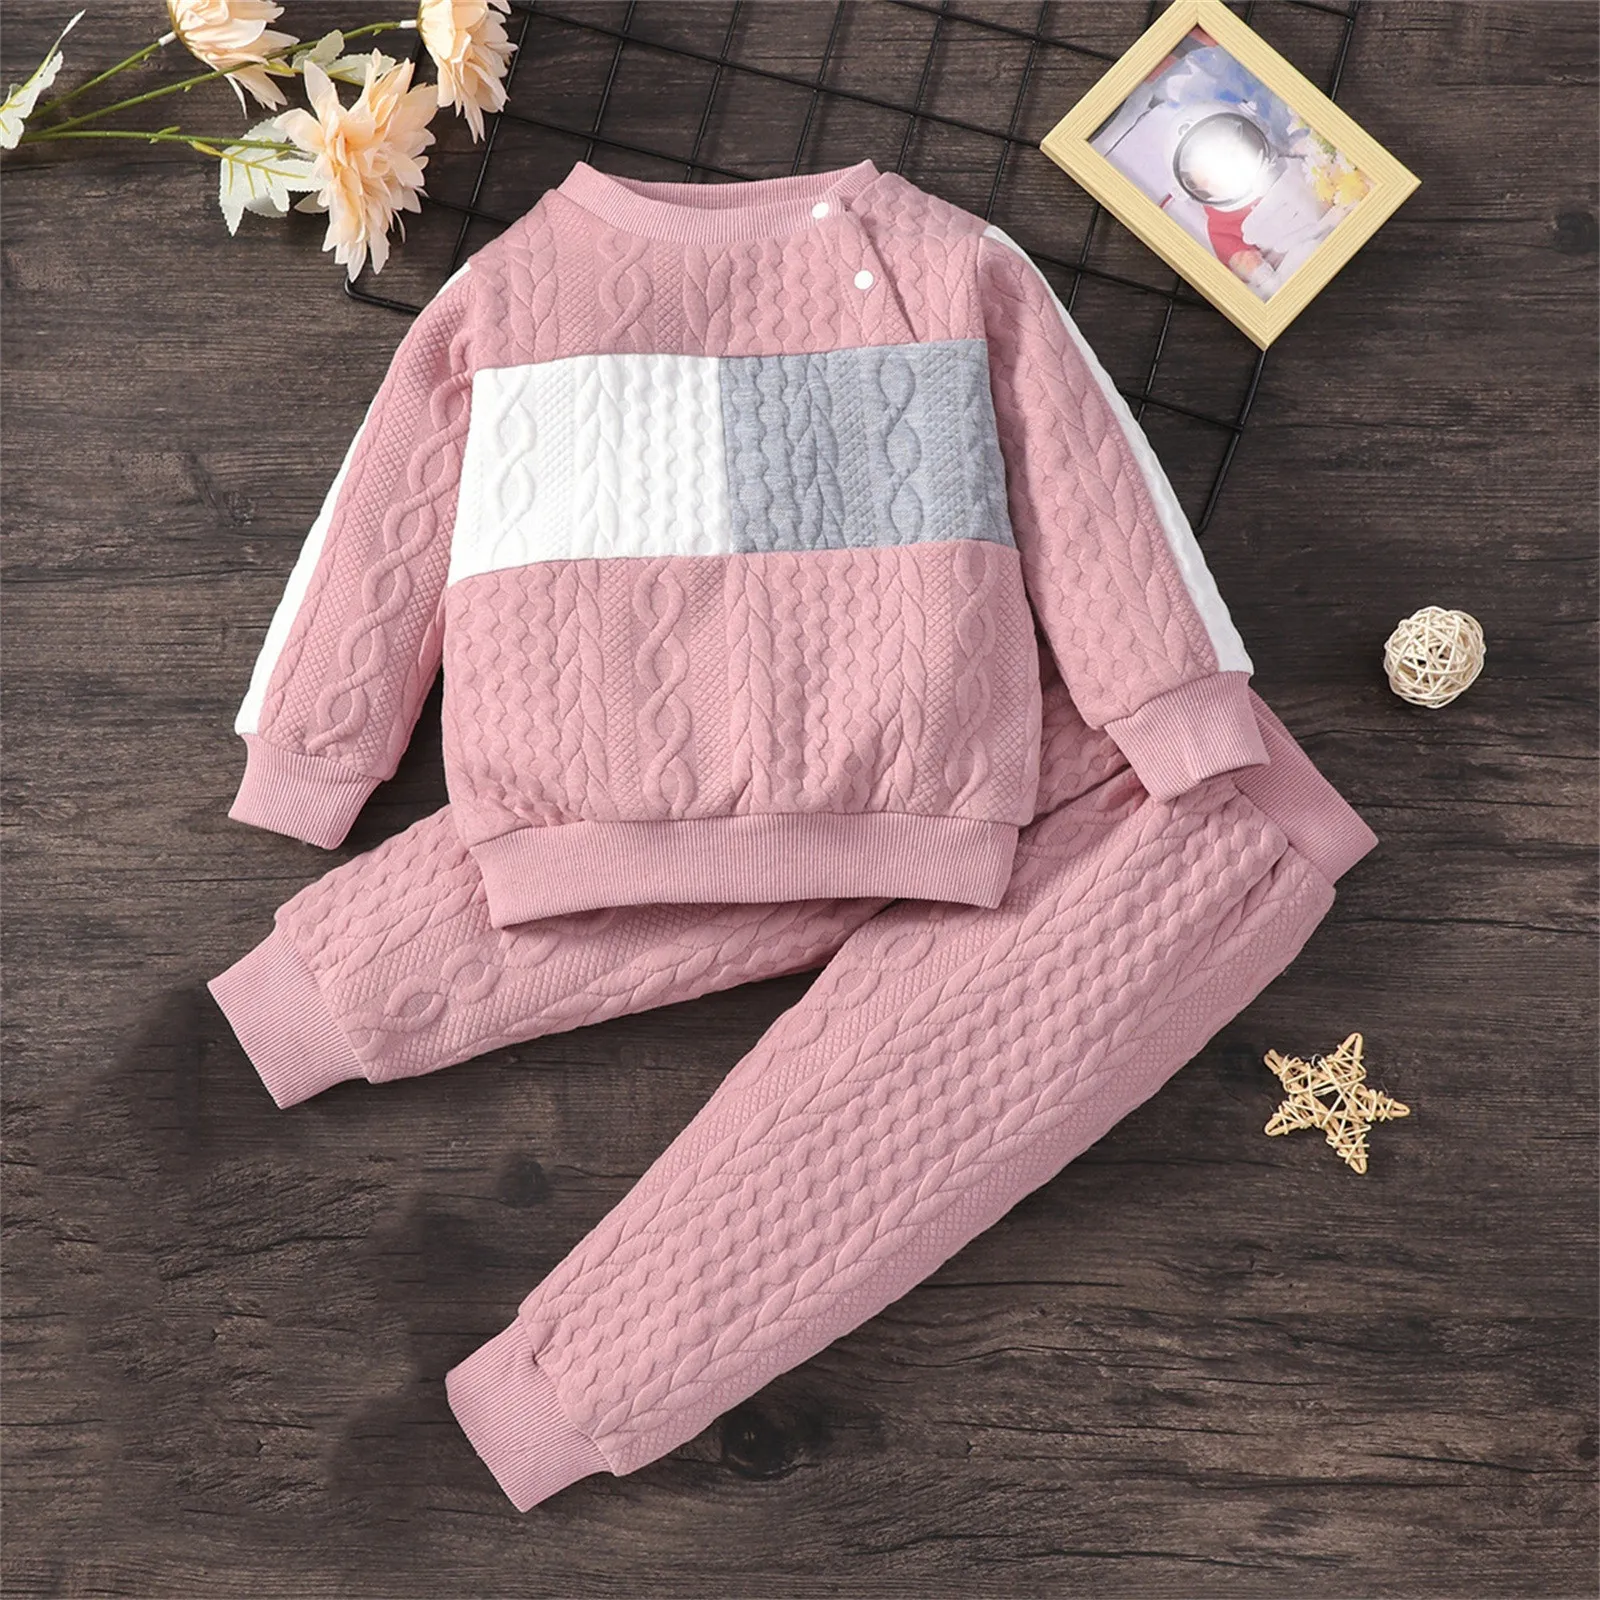 2pcs Kids Clothing Sets Solid Color Long-sleeve Imitation Knitting Baby Sets Kids Boys Girls Winter Clothing Suits For 1-6 Years